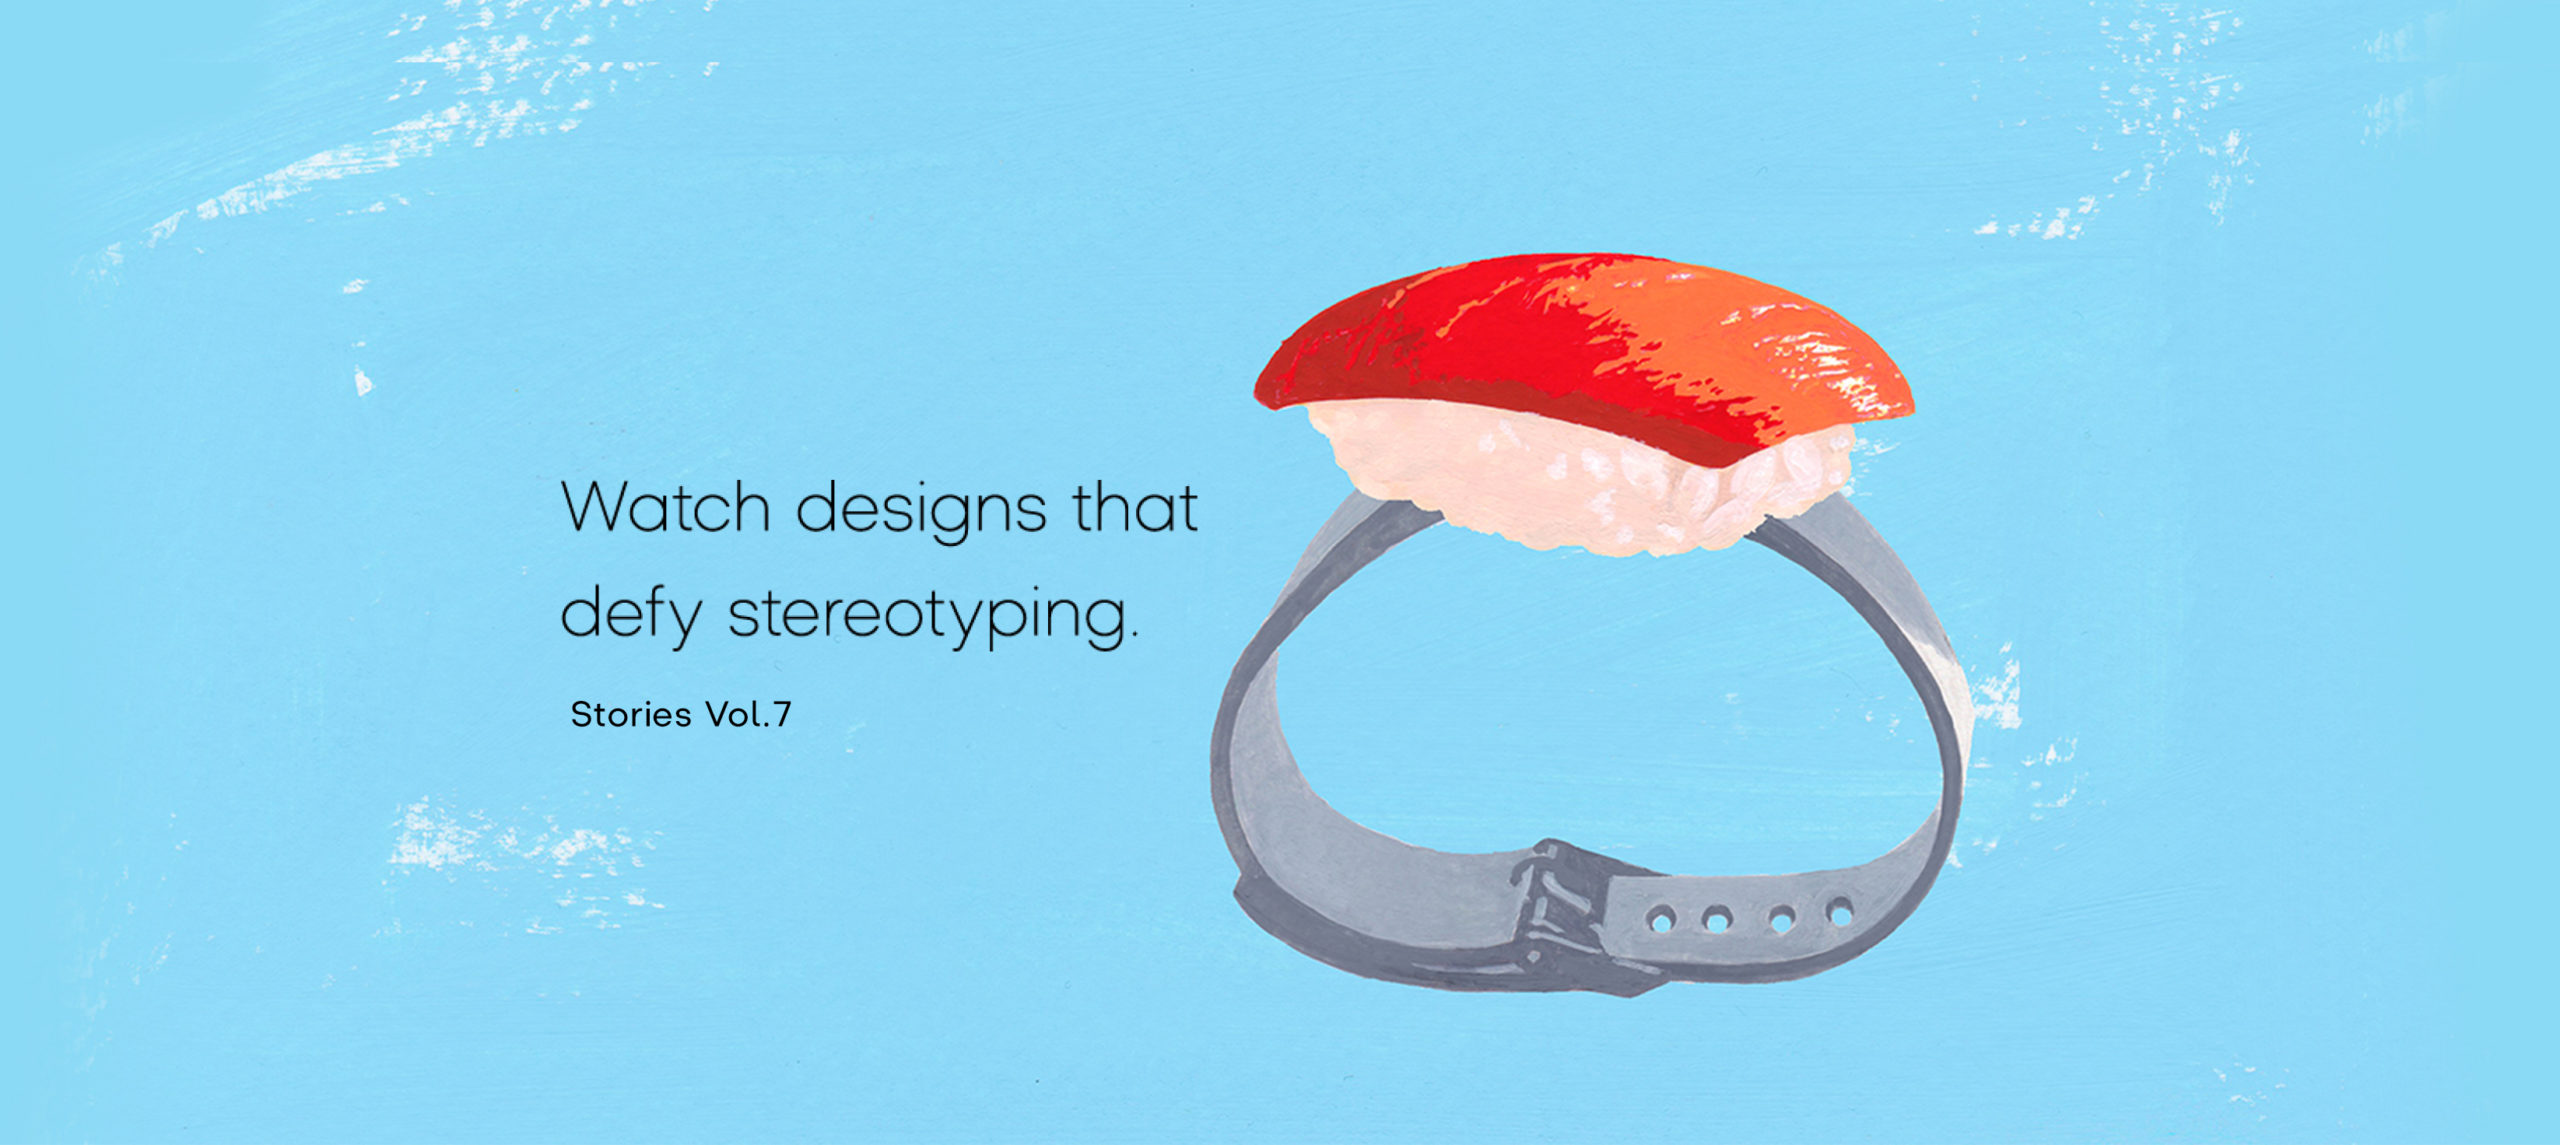 Vol.7 Watch designs that defy stereotyping.